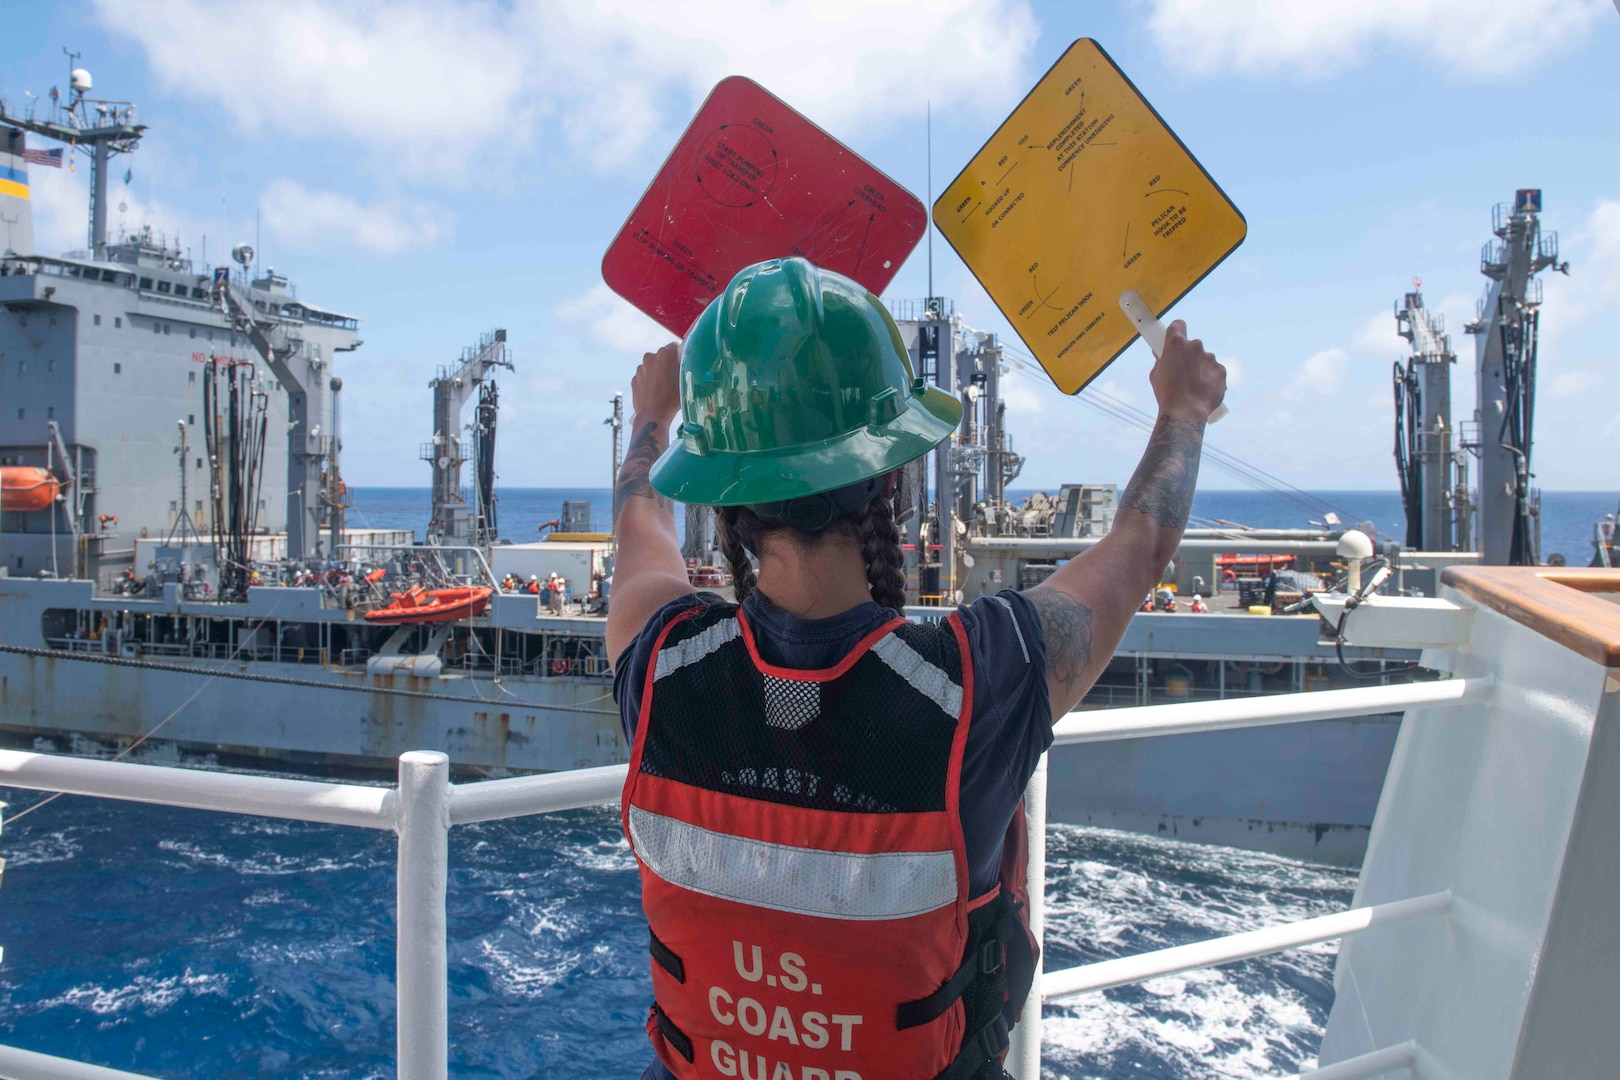 Petty Officer 2nd Class Mikayla Parnell relays signals on the fueling deck of U.S. Coast Guard Cutter Bertholf (WMSL 750) during a refueling at sea evolution with U.S. Naval Ship John Ericsson (T-AO 194) on Feb. 23, 2024, in the South China Sea. Bertholf is deployed to the Indo-Pacific region to advance relationships with ally and partner nations. (U.S. Navy photo by Mass Communication Specialist 3rd Class Charlotte Duran)